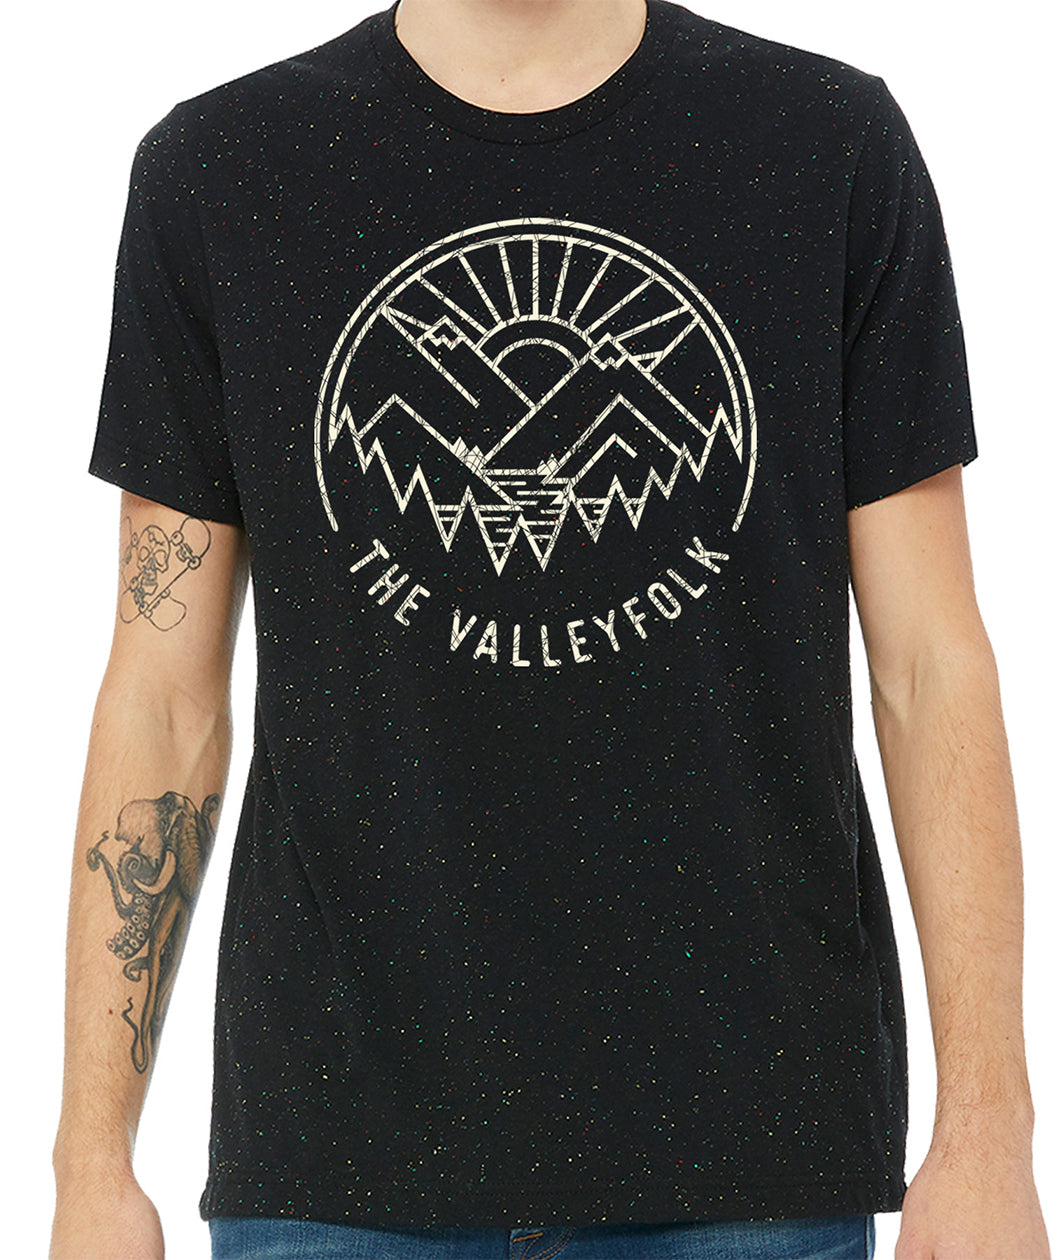 A black shirt with red yellow and blue speckles with a distressed circular logo of a white outline of mountains, a lake, trees, and a sun rising. “The Valleyfolk” is arched at the bottom in white sans serif font - from the Valleyfolk